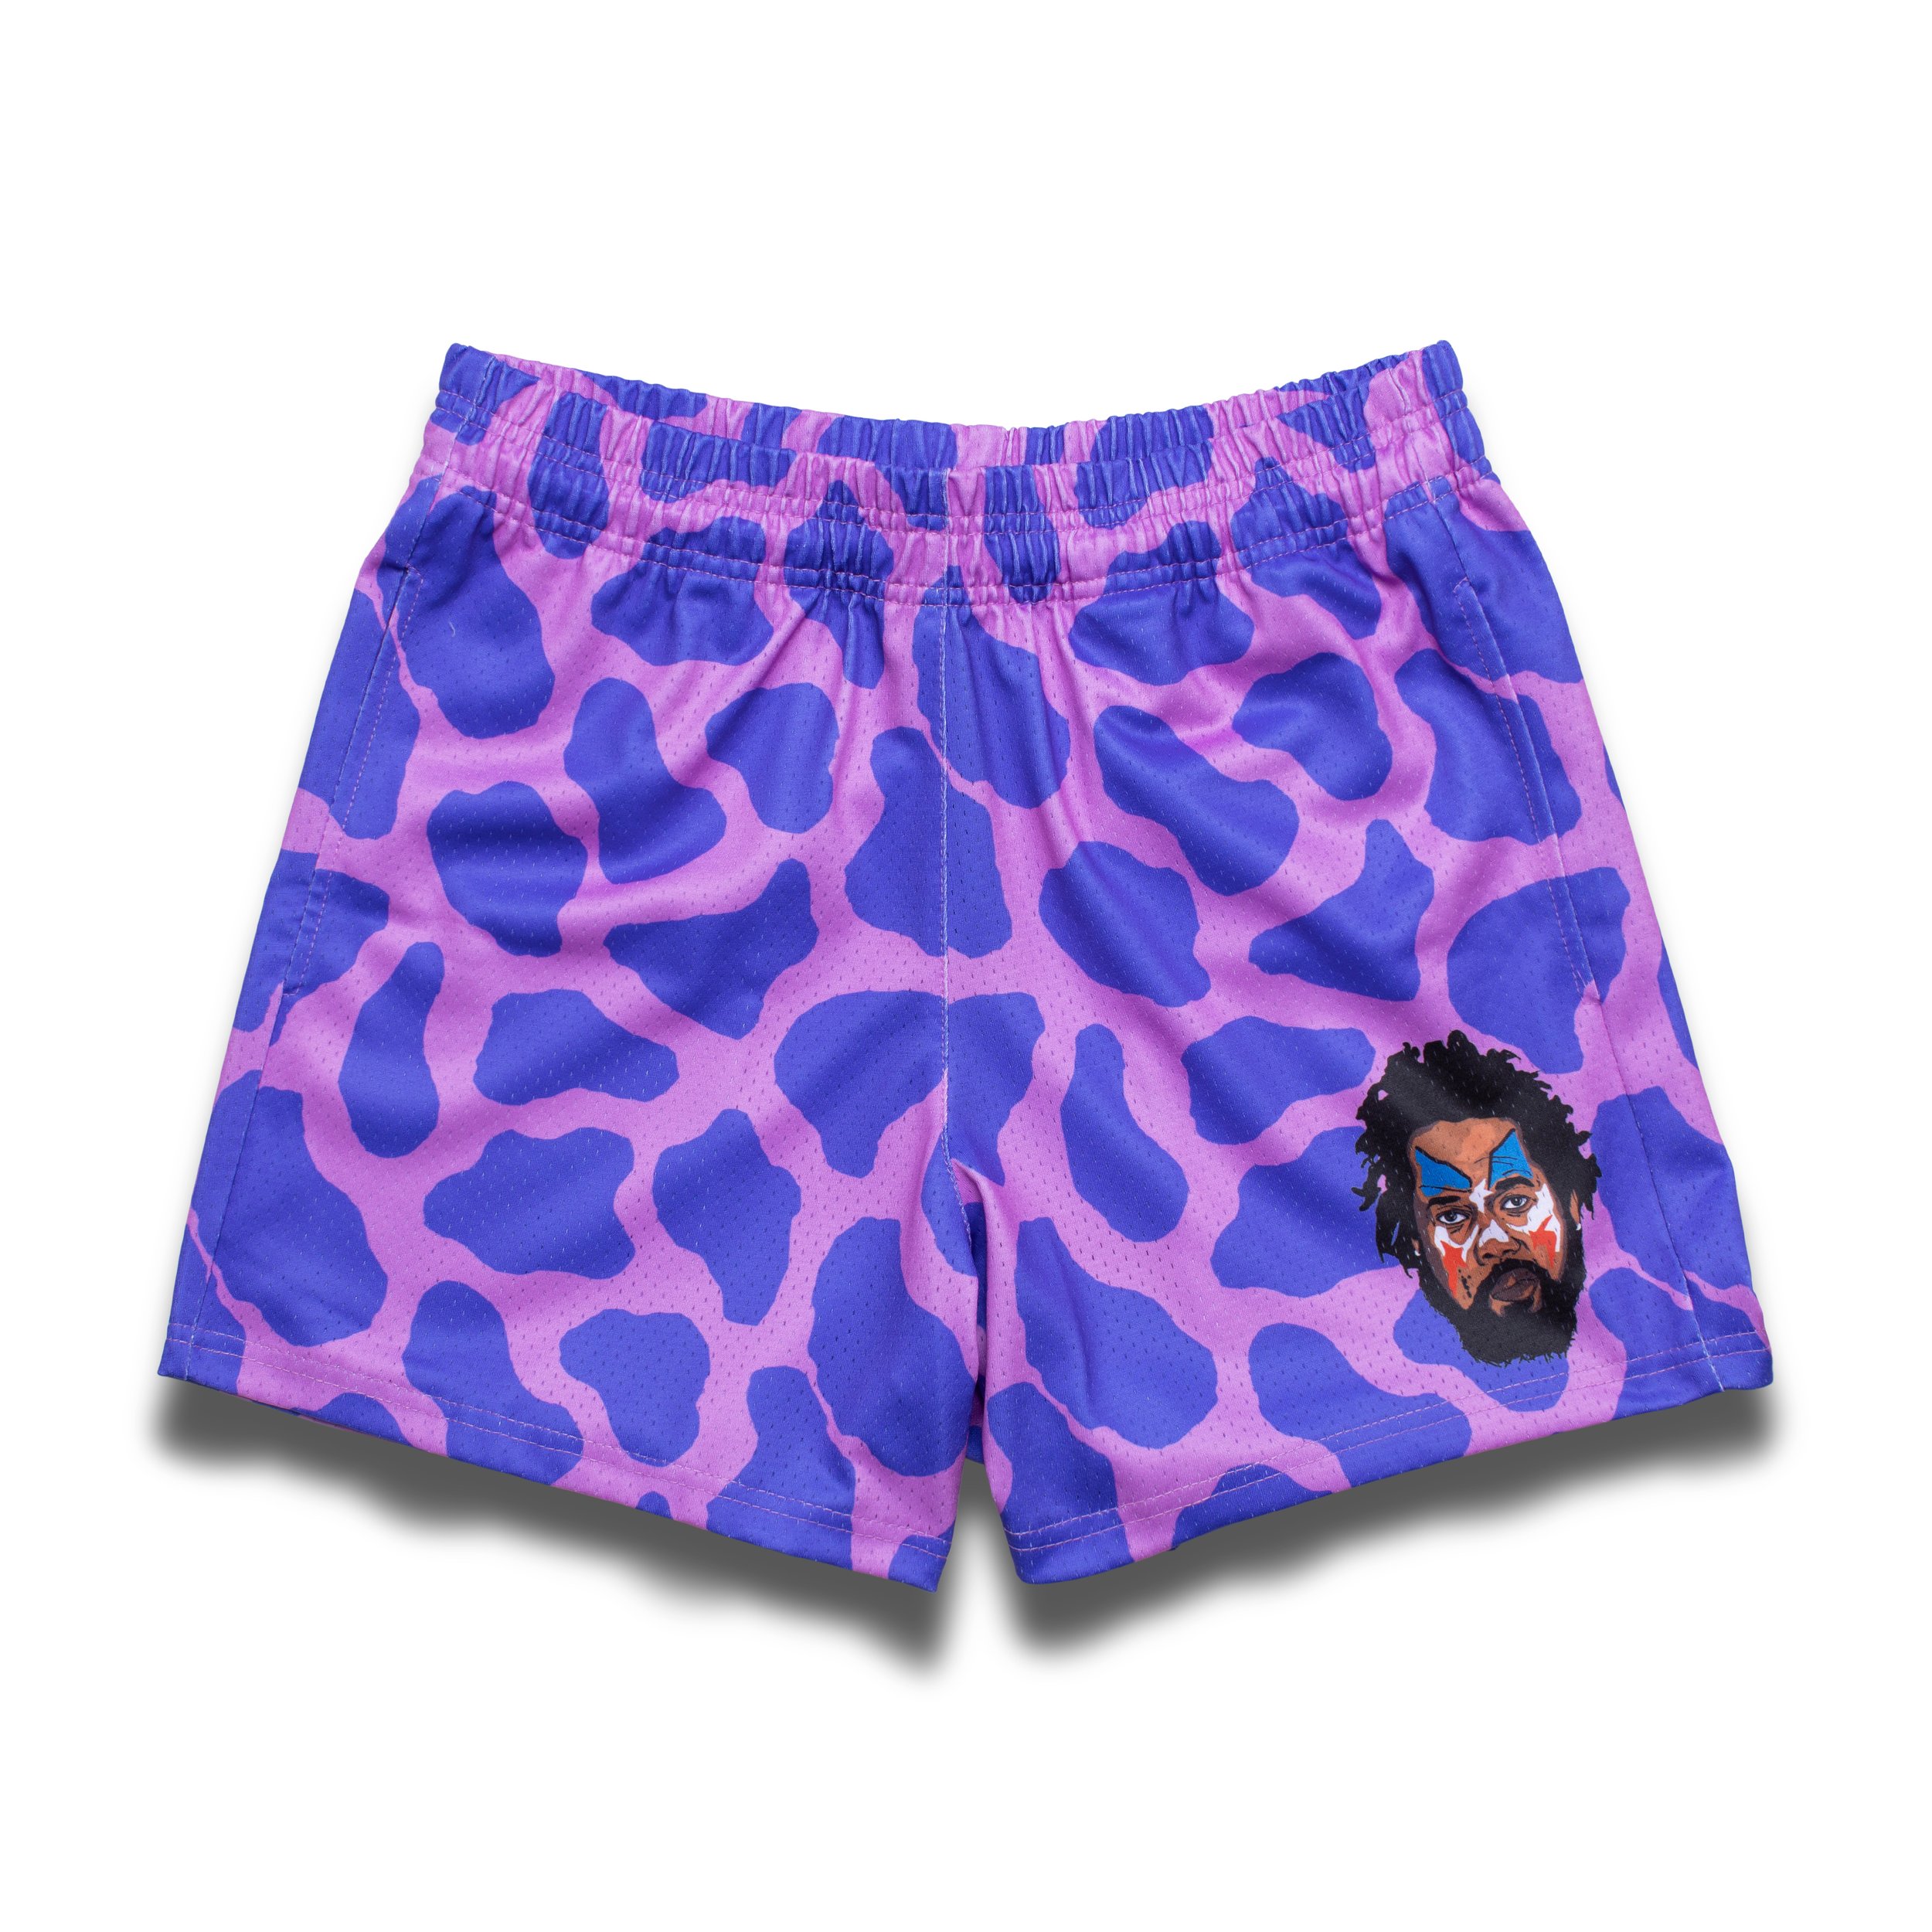 Mesh Shorts | Sublimated Design | 300g Weight Fabric | Conway The Machine